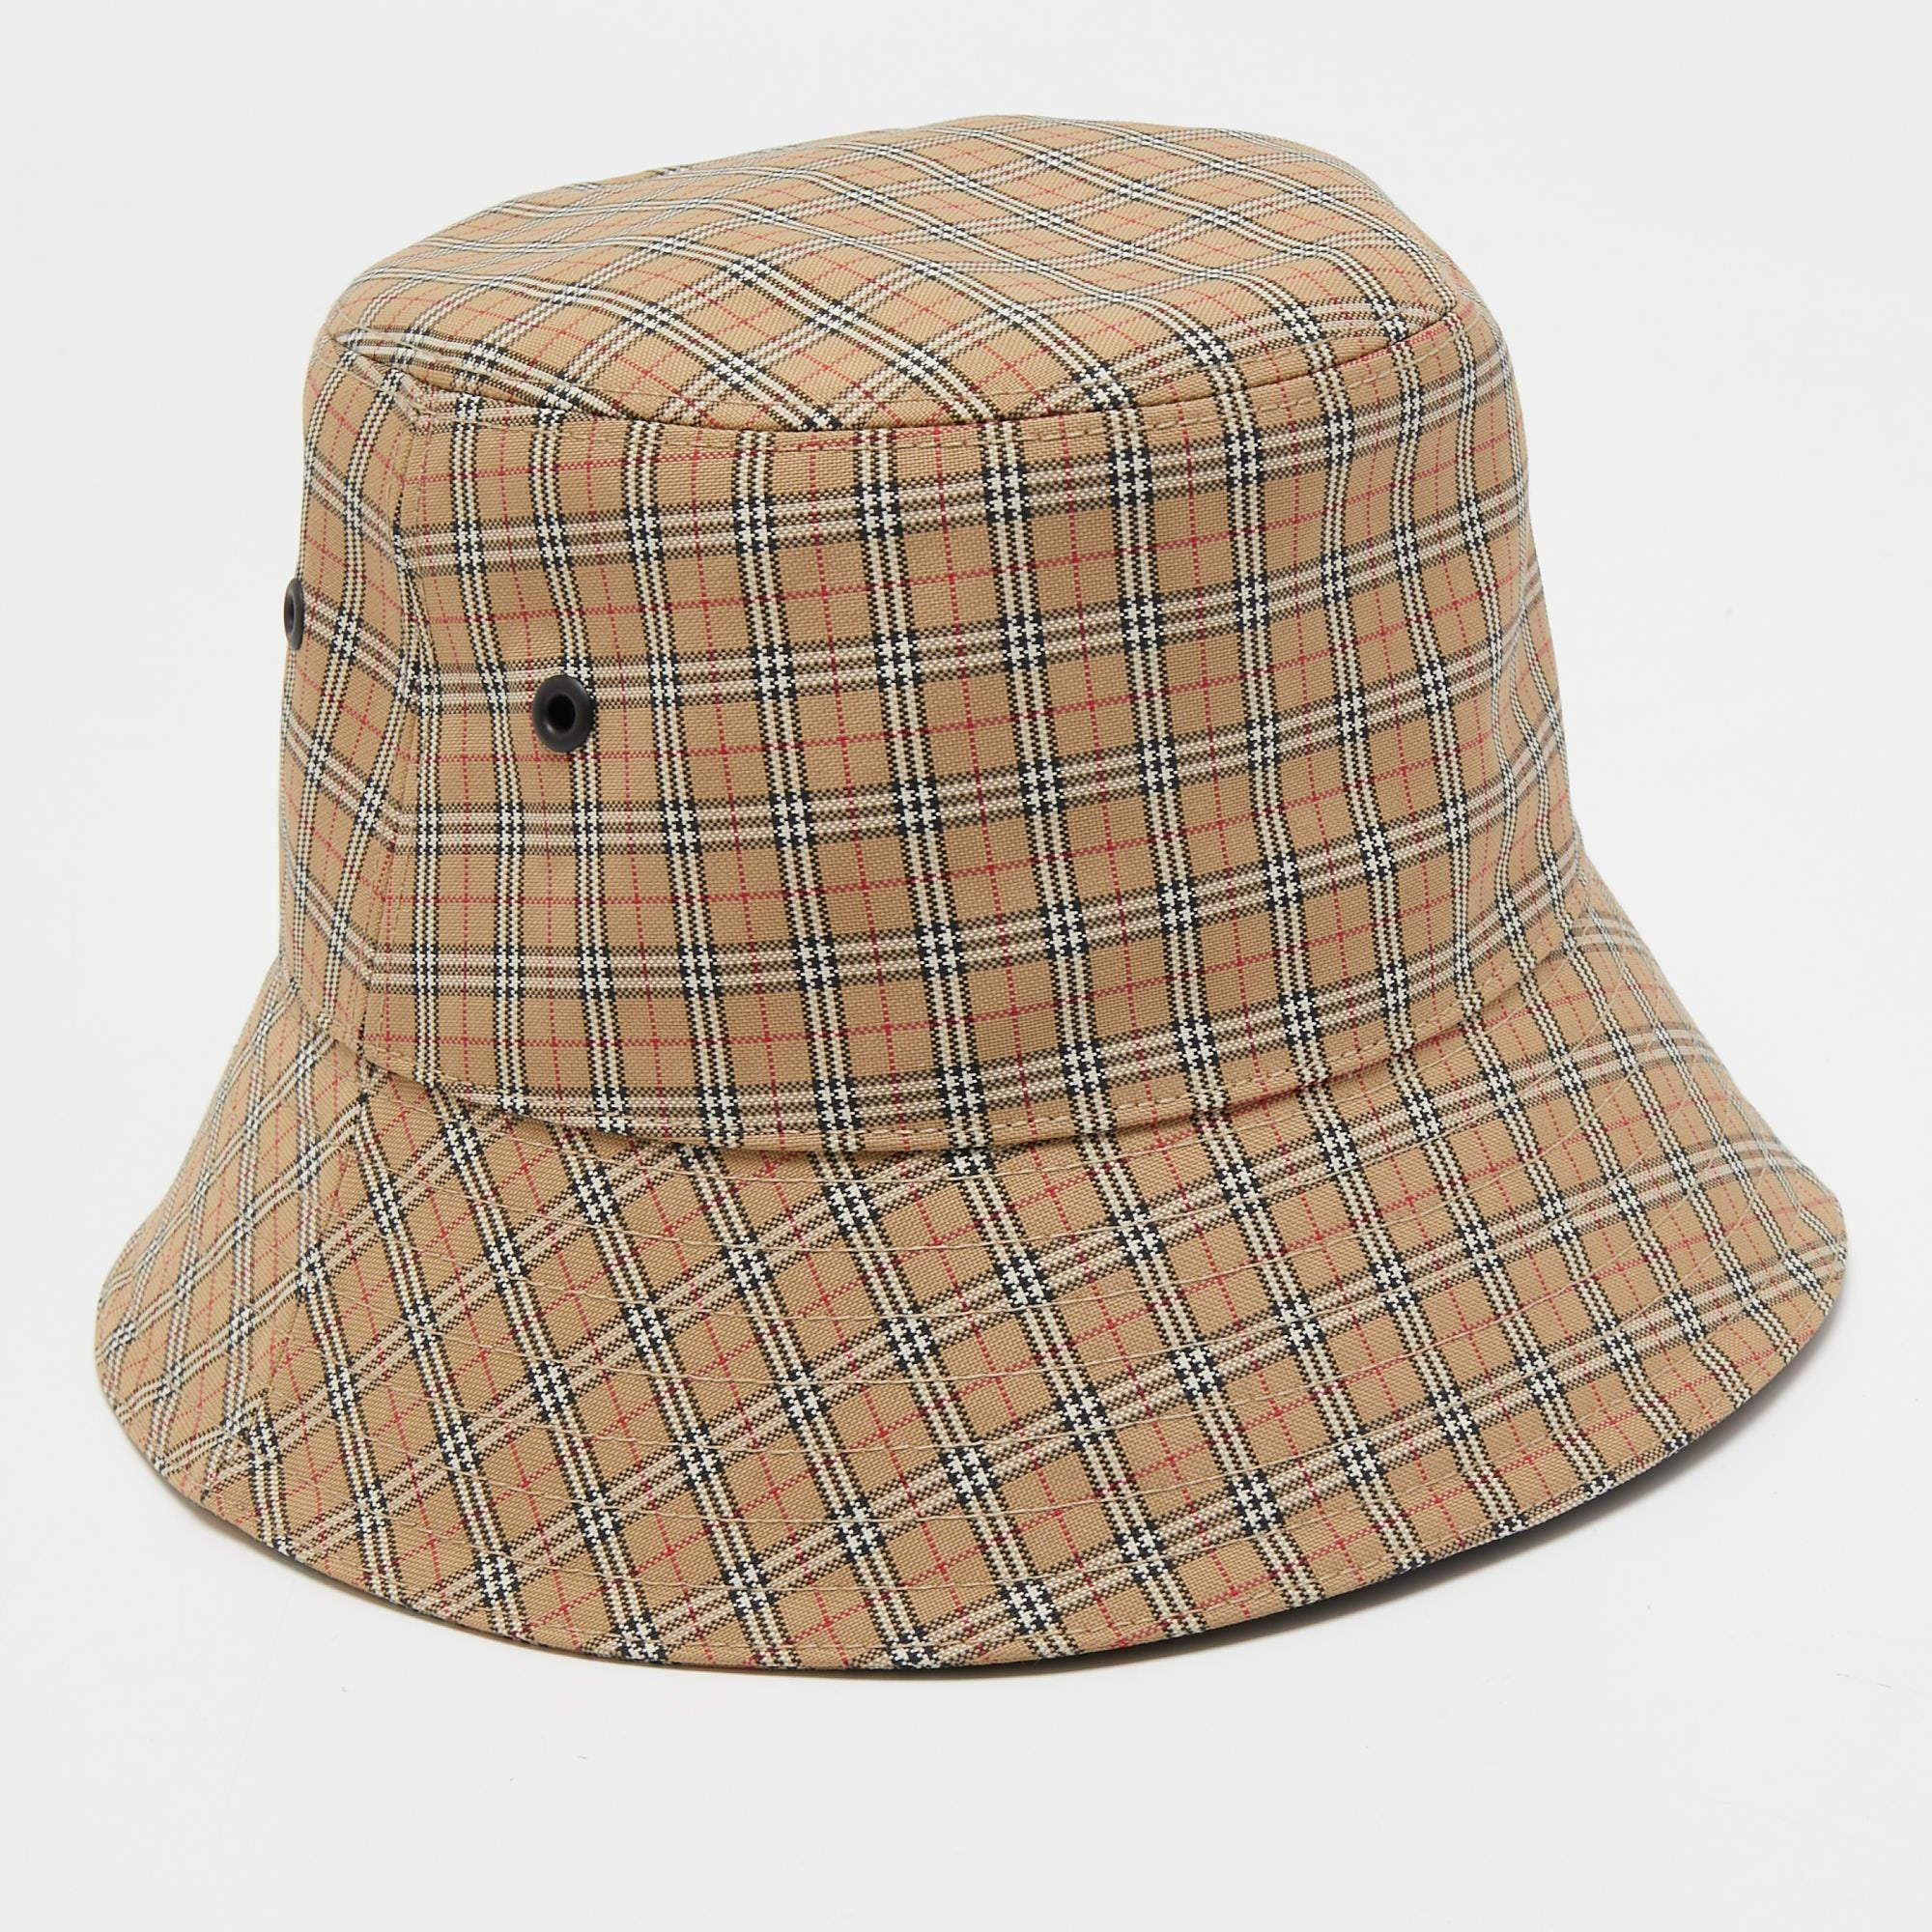 Bucket hats are one accessory that can complete a stylish look. Made in Italy from quality materials, this Burberry bucket hat flaunts a vintage checked exterior while the brand label is neatly stitched inside. This piece is trendy and quite